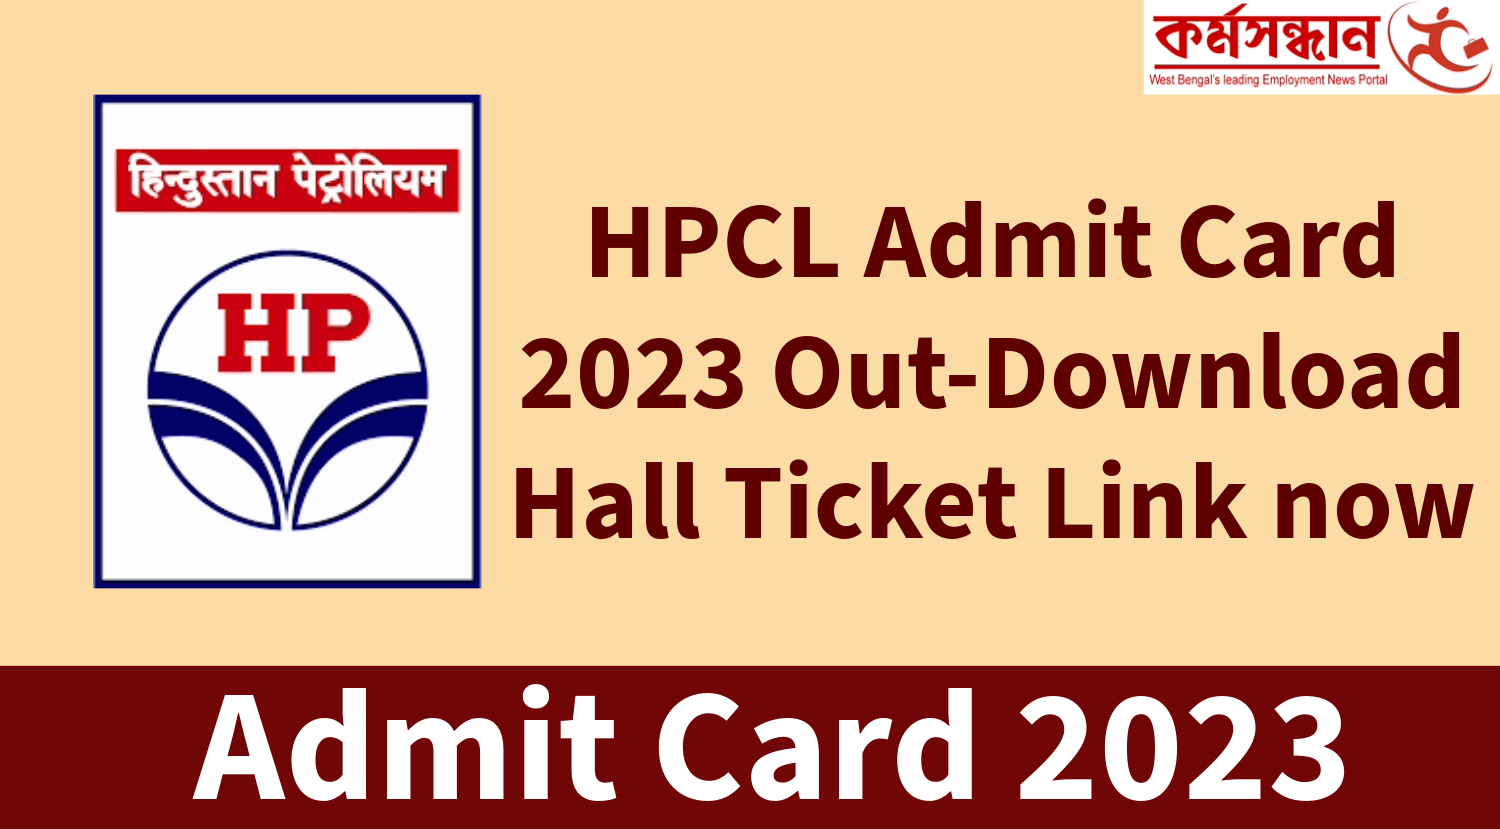 HPCL Admit Card 2023, Download Link, Exam Date, Syllabus